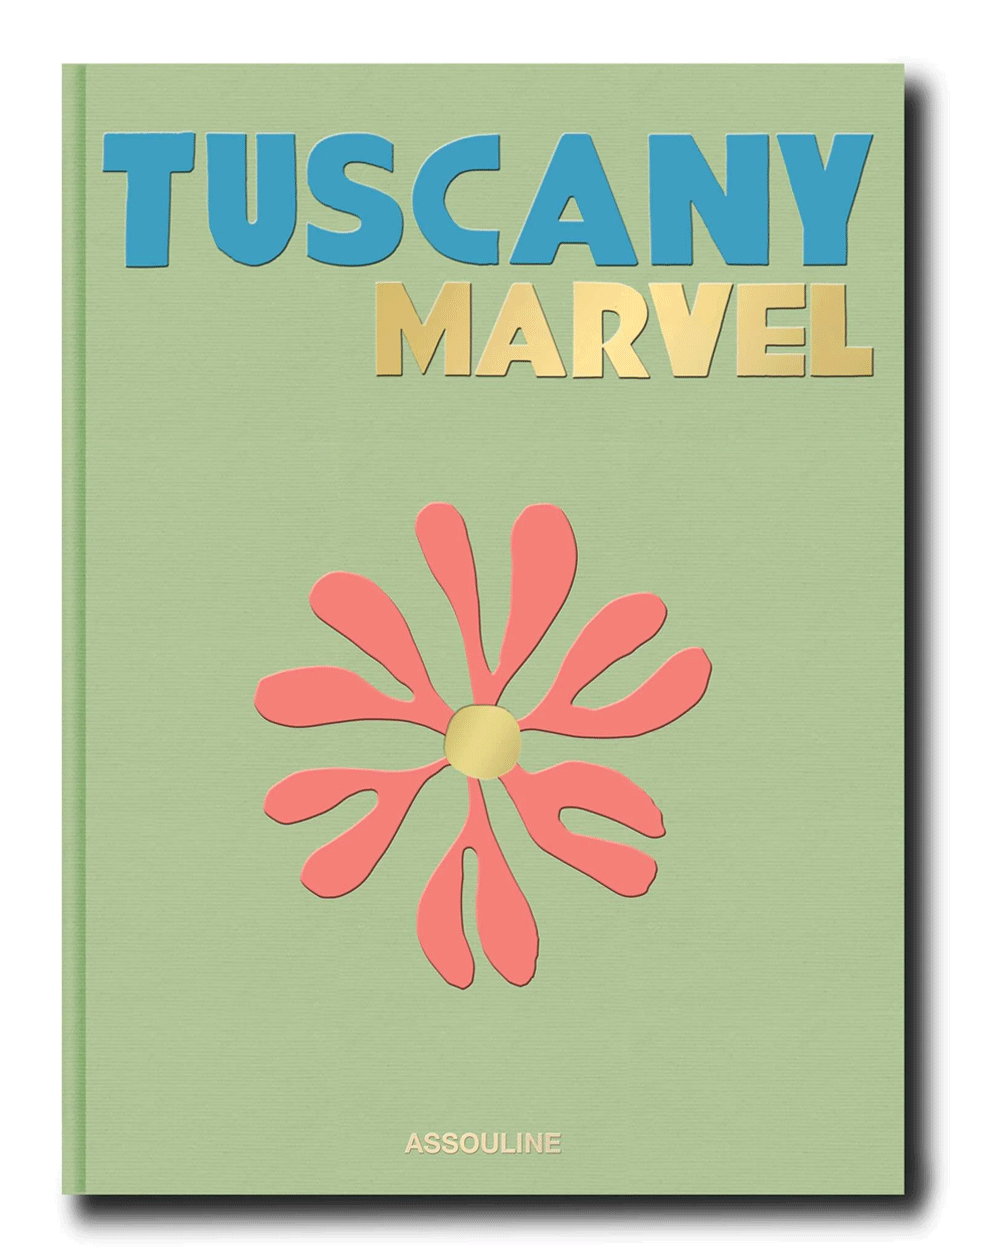 Tuscany Marvel by Cesare Cunaccia